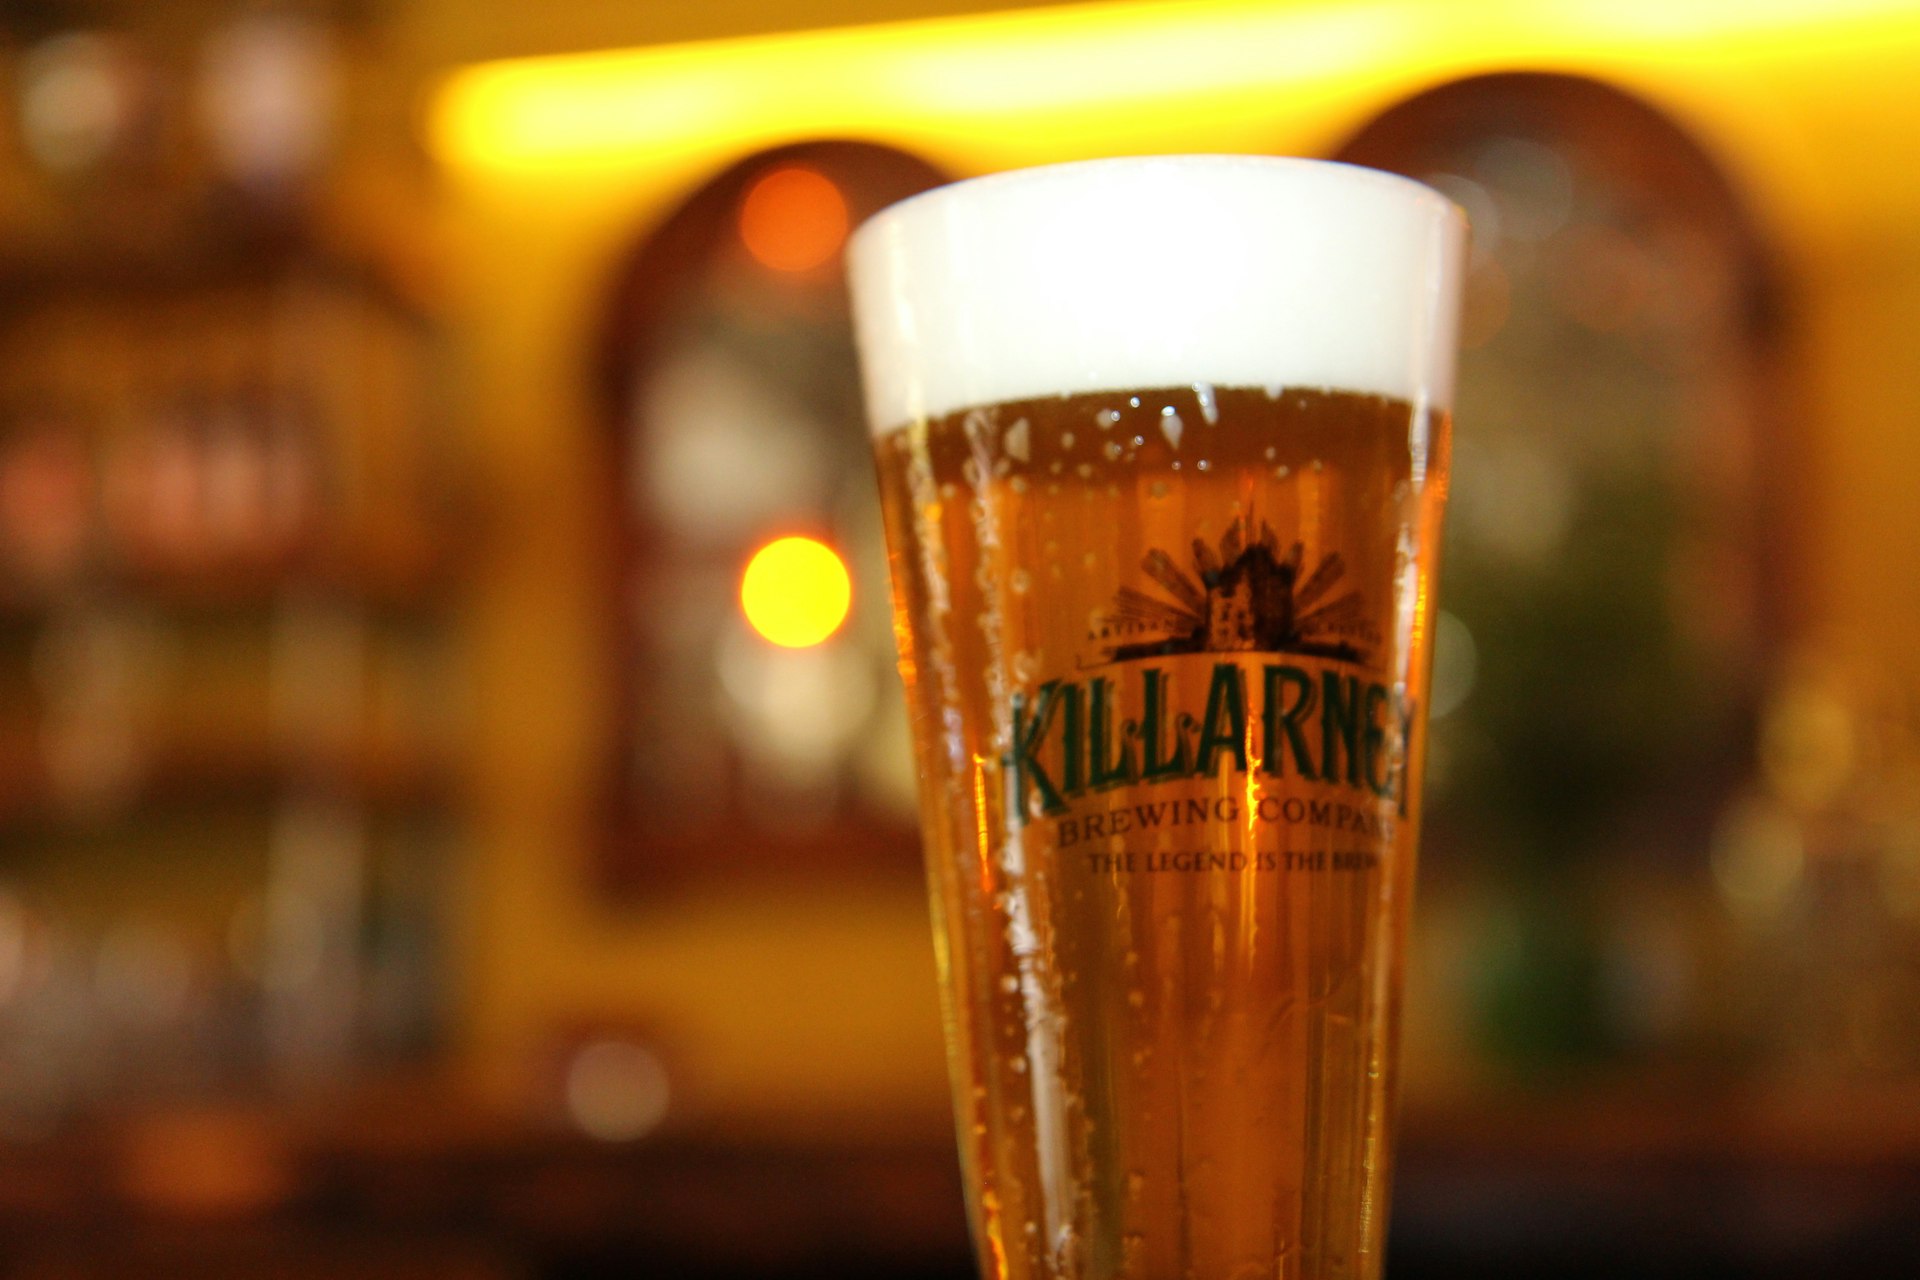 A cold, tempting pint at the 2015 Killarney Beer Festival. Image by Beoir Ireland / CC BY 2.0